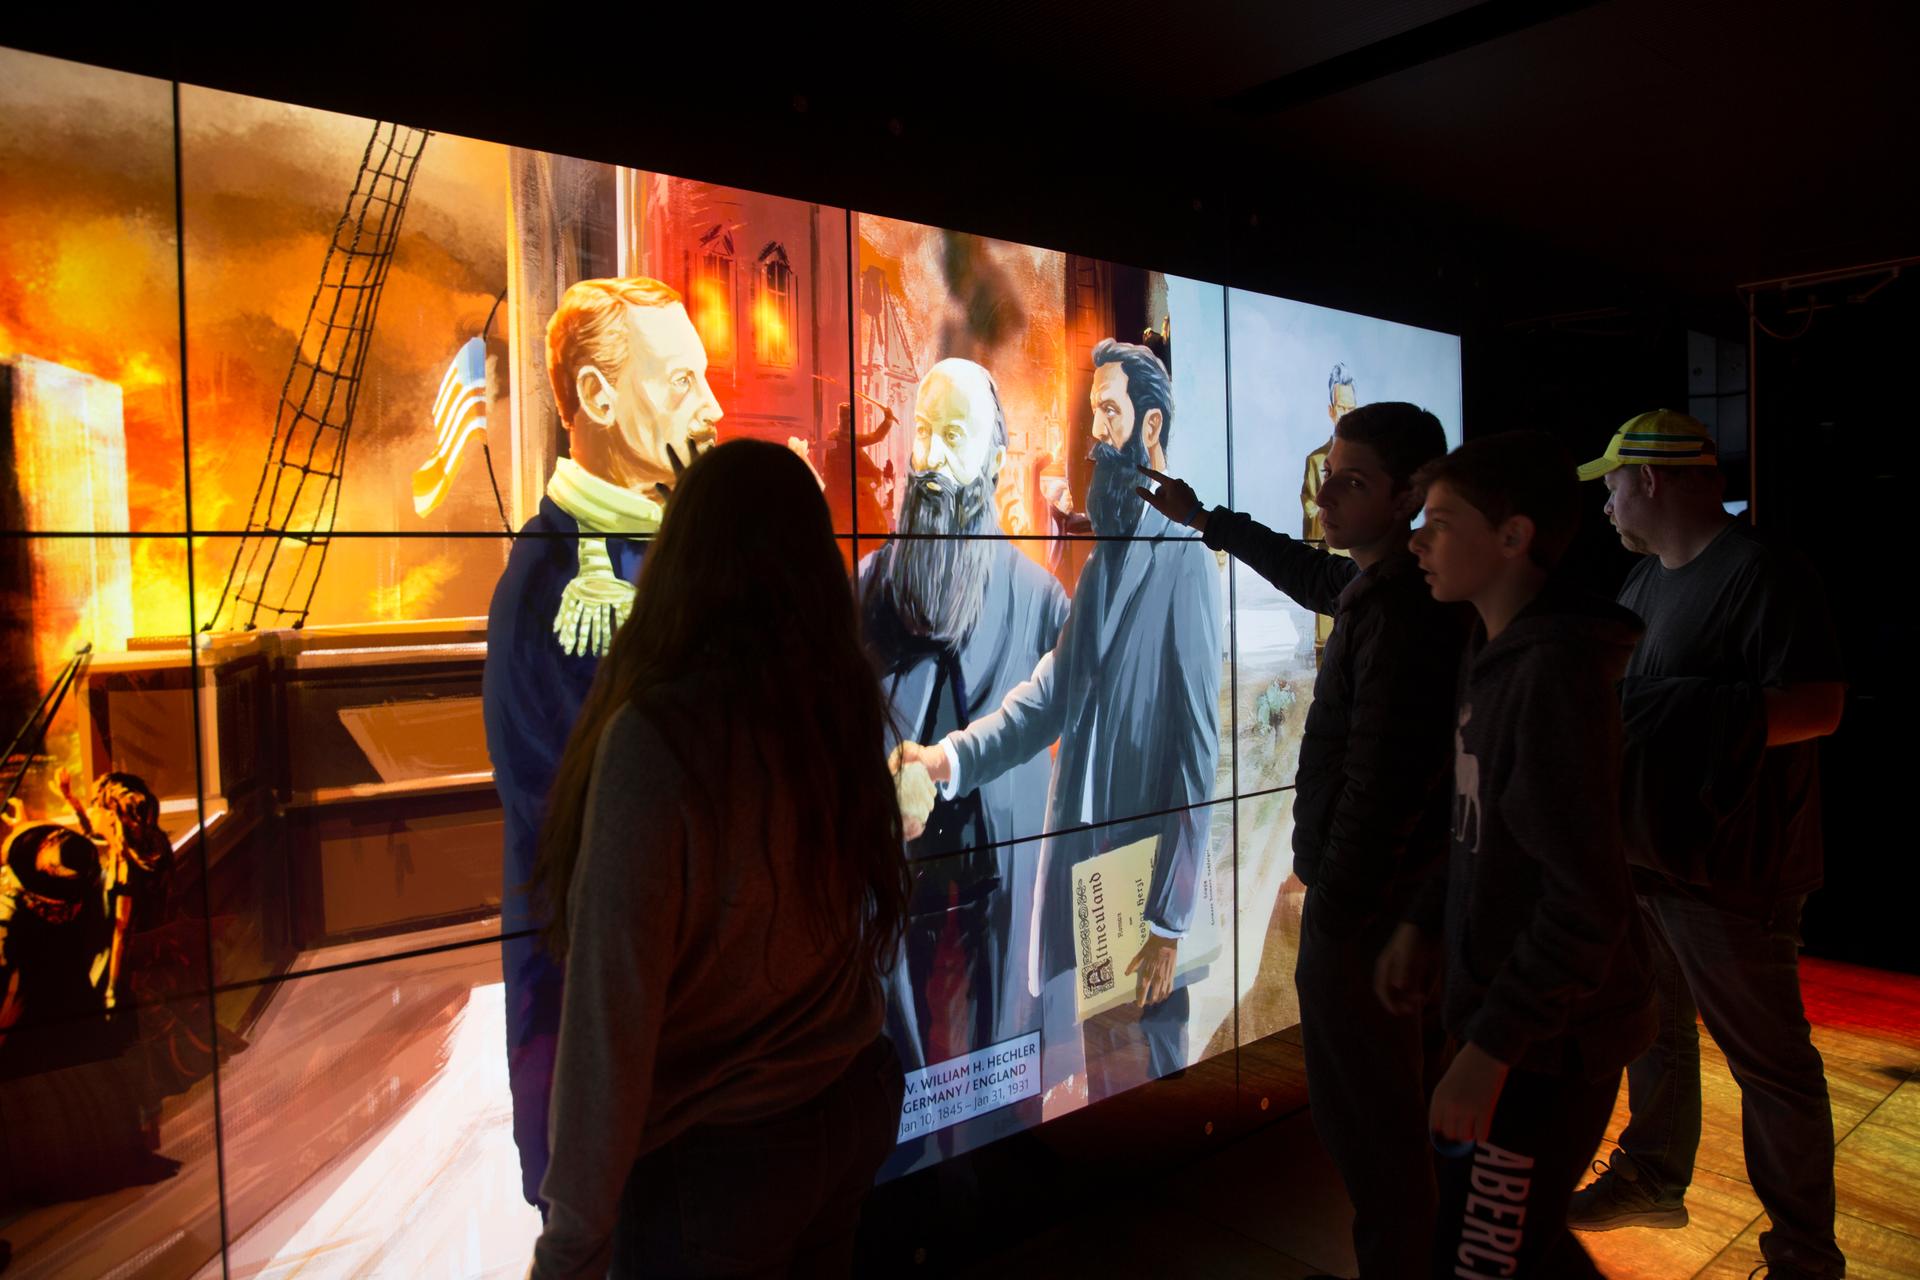 Visitors at an interactive exhibit in the Visionaries Gallery of the Friends of Zion Museum in Jerusalem